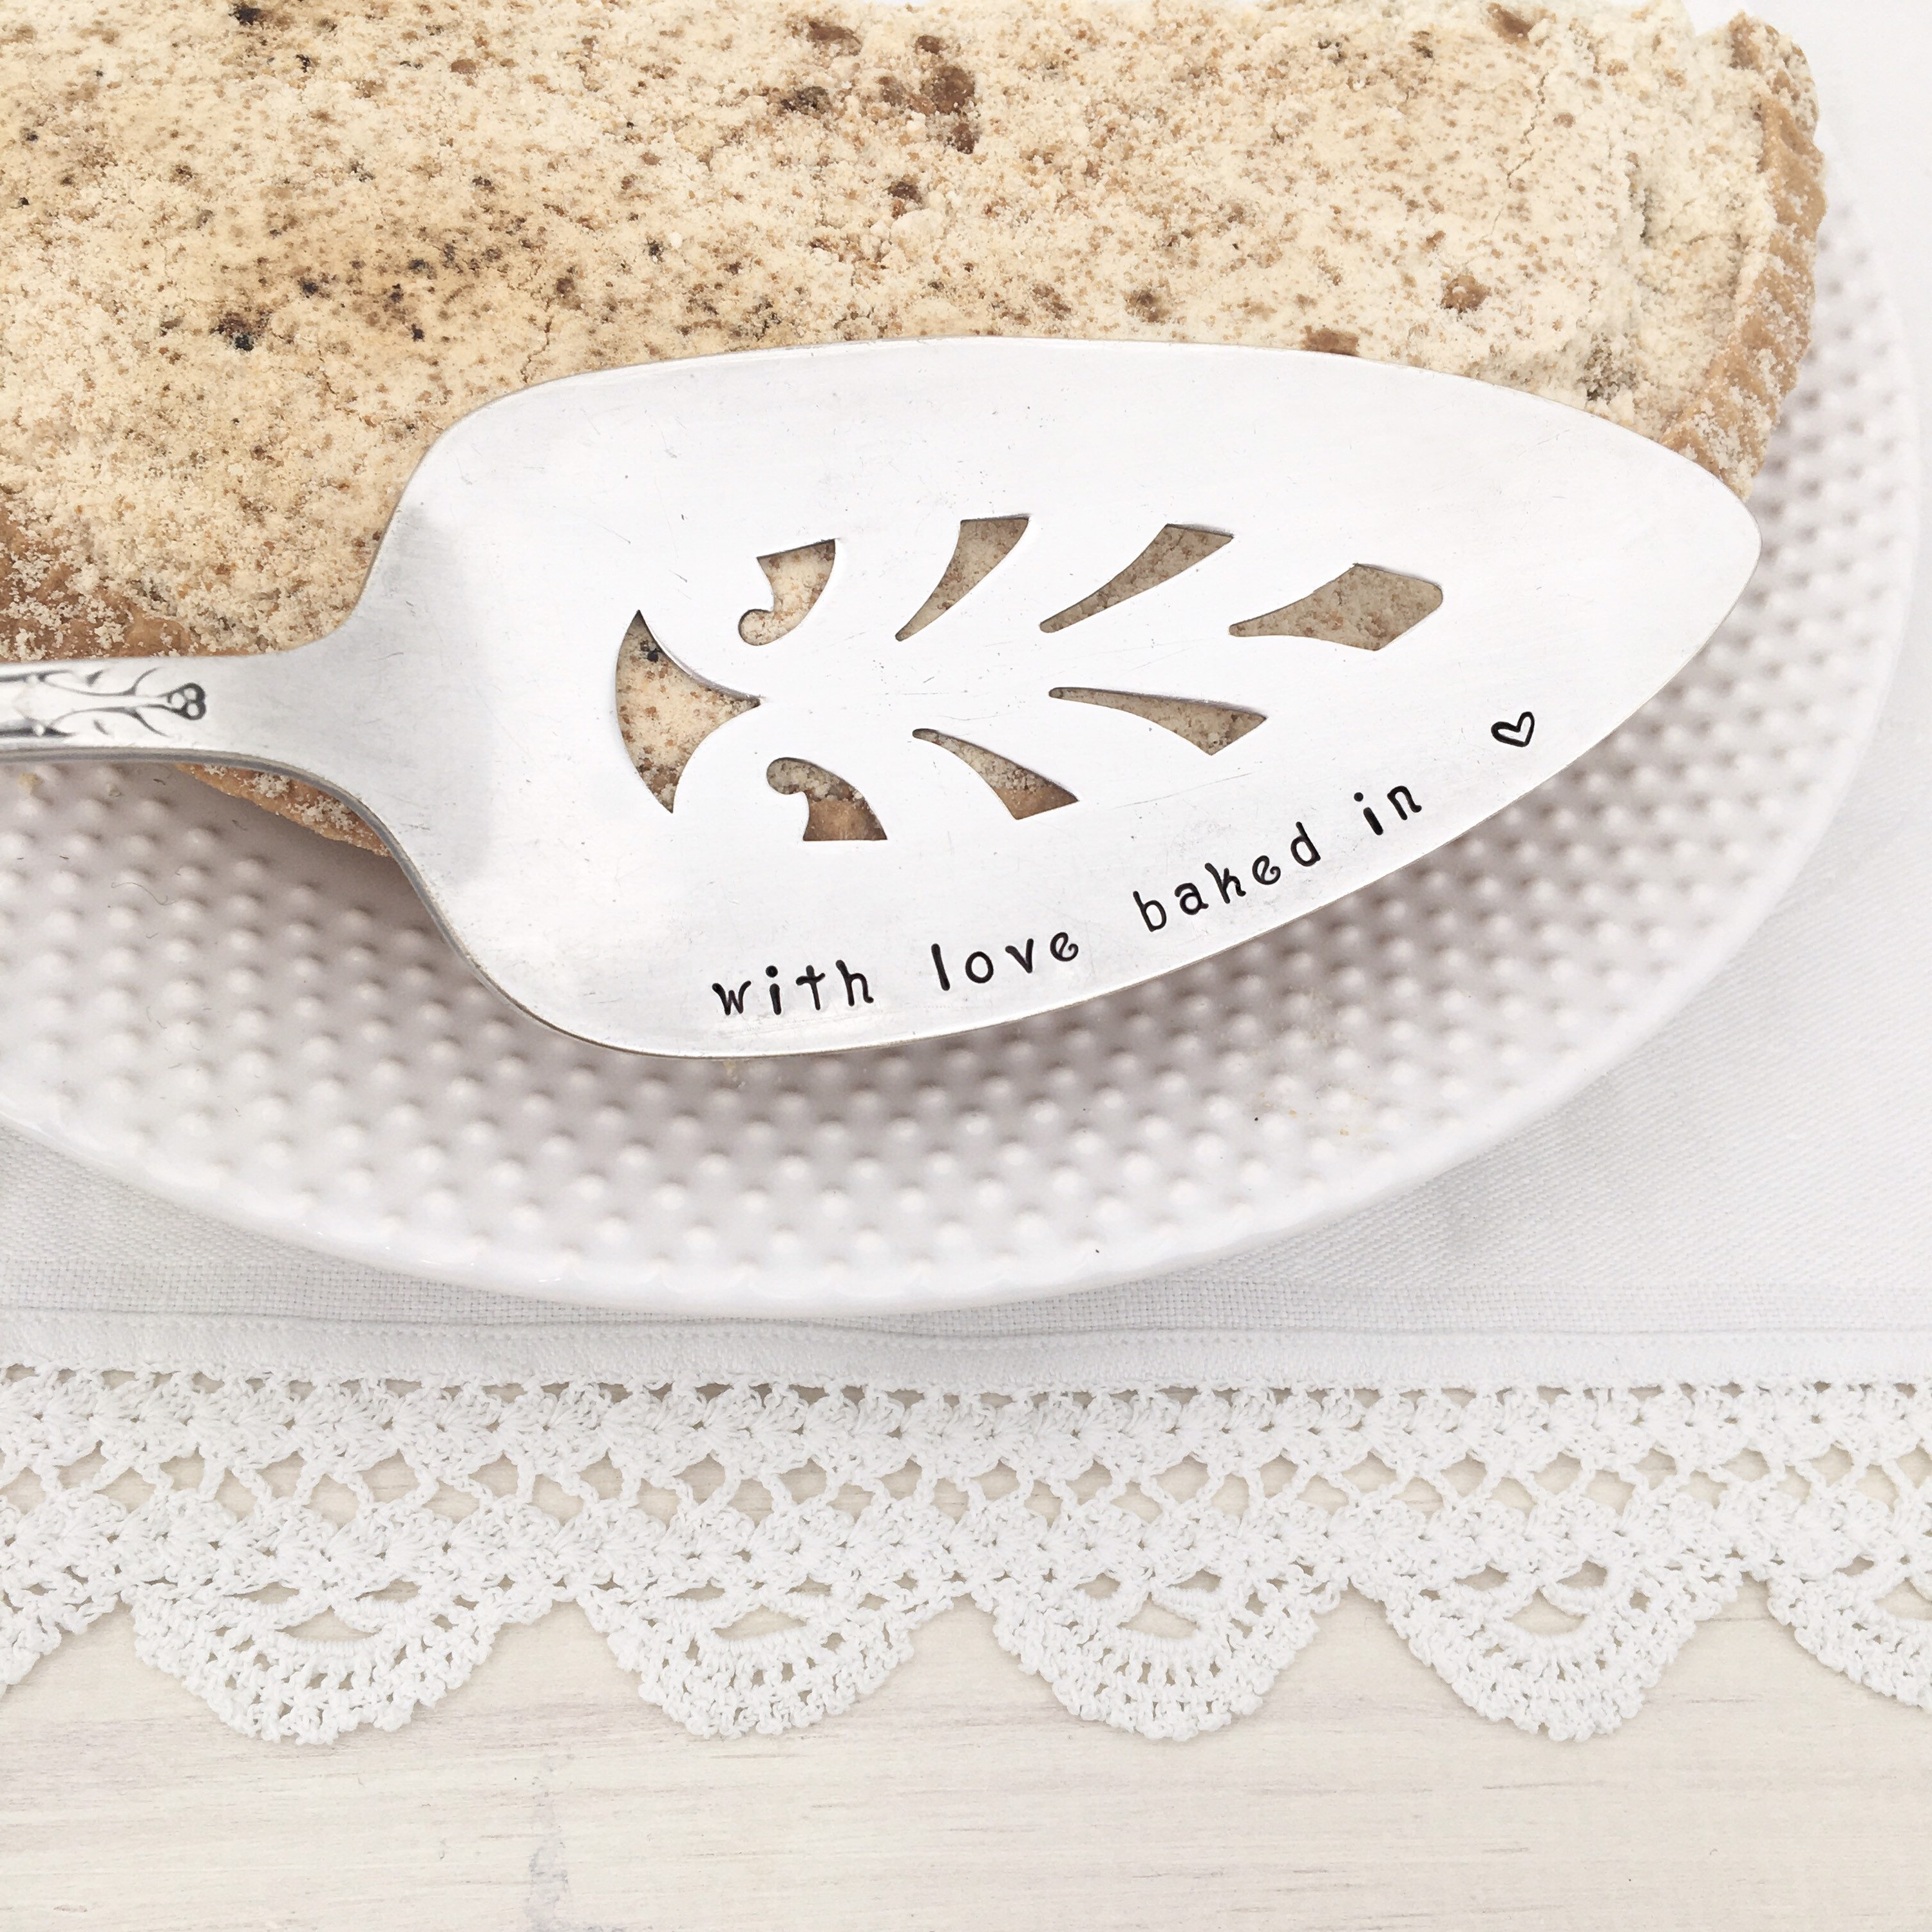 With Love Baked in Hand Stamped Cake / Pie Server Gift